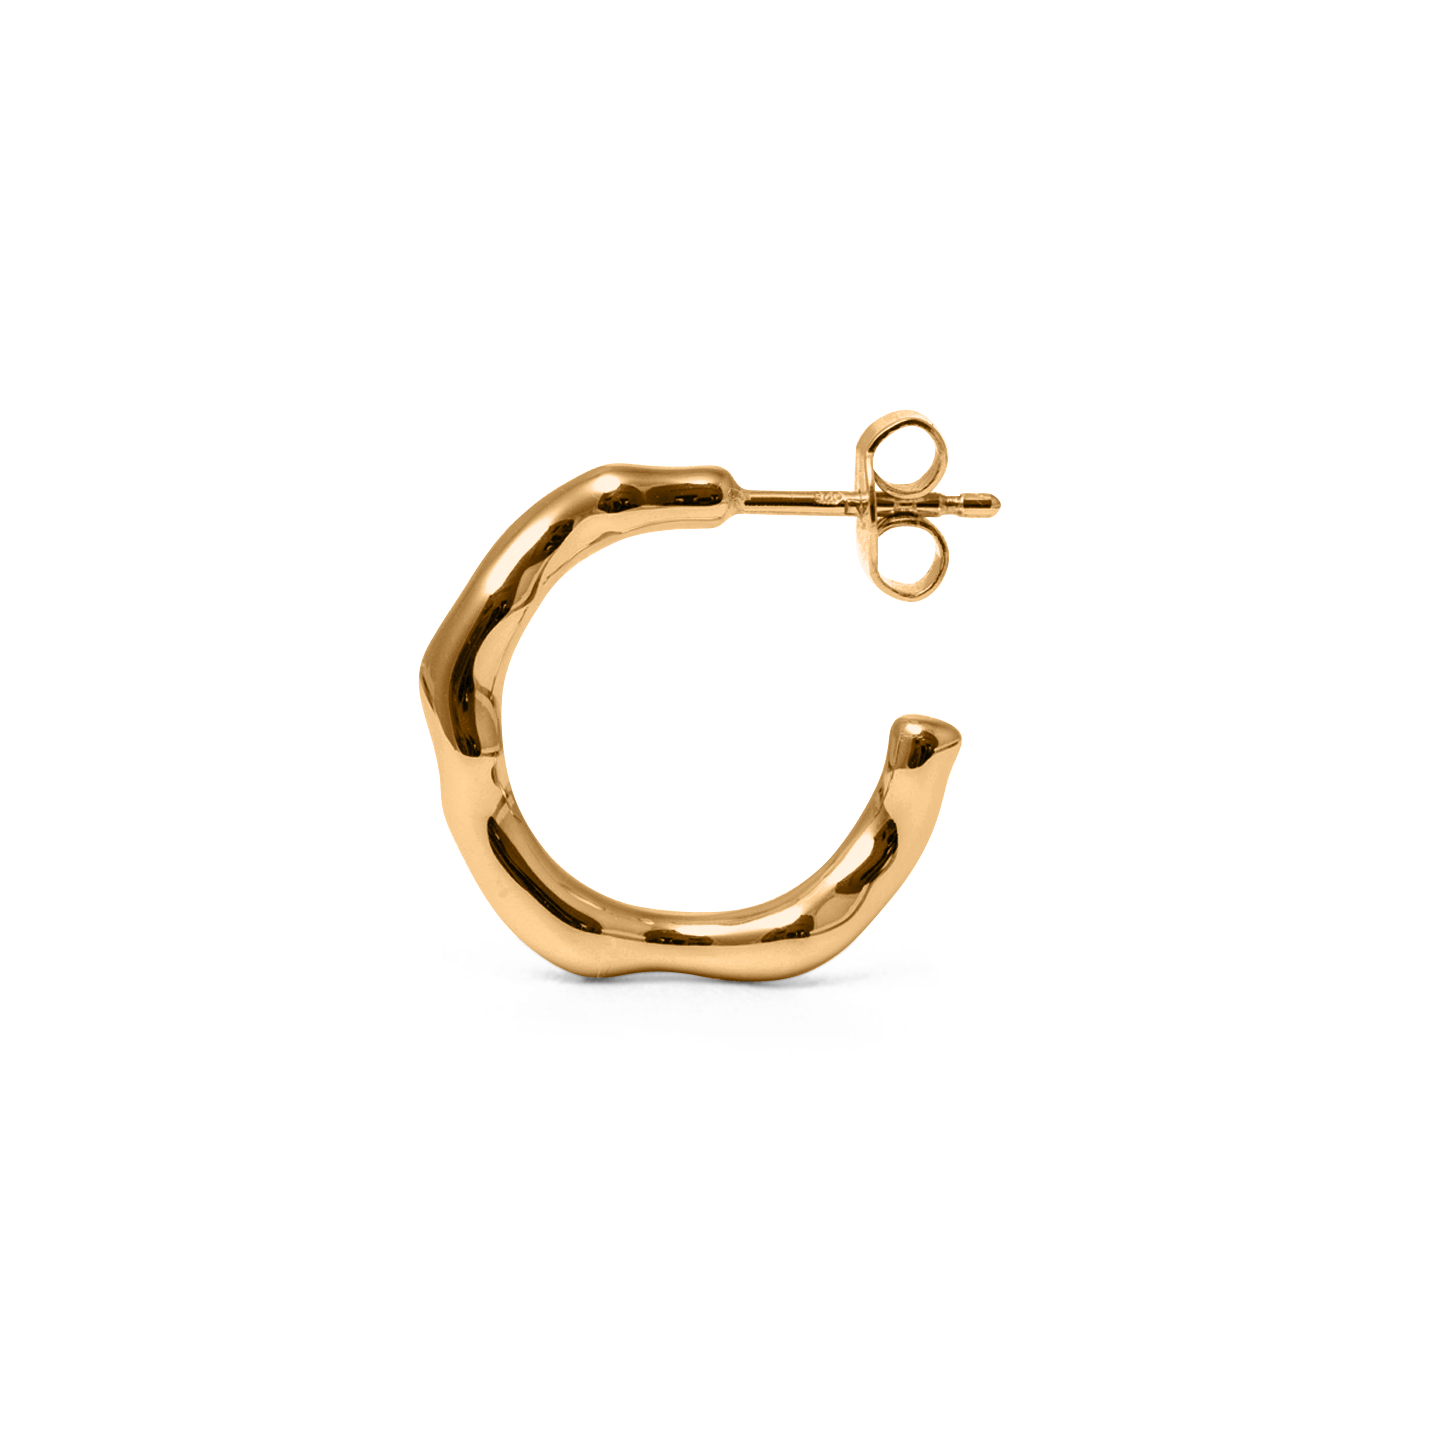 L'Or Liquide Ear Hoops Jewelry teetharejade 925 Silver Gold Plated 